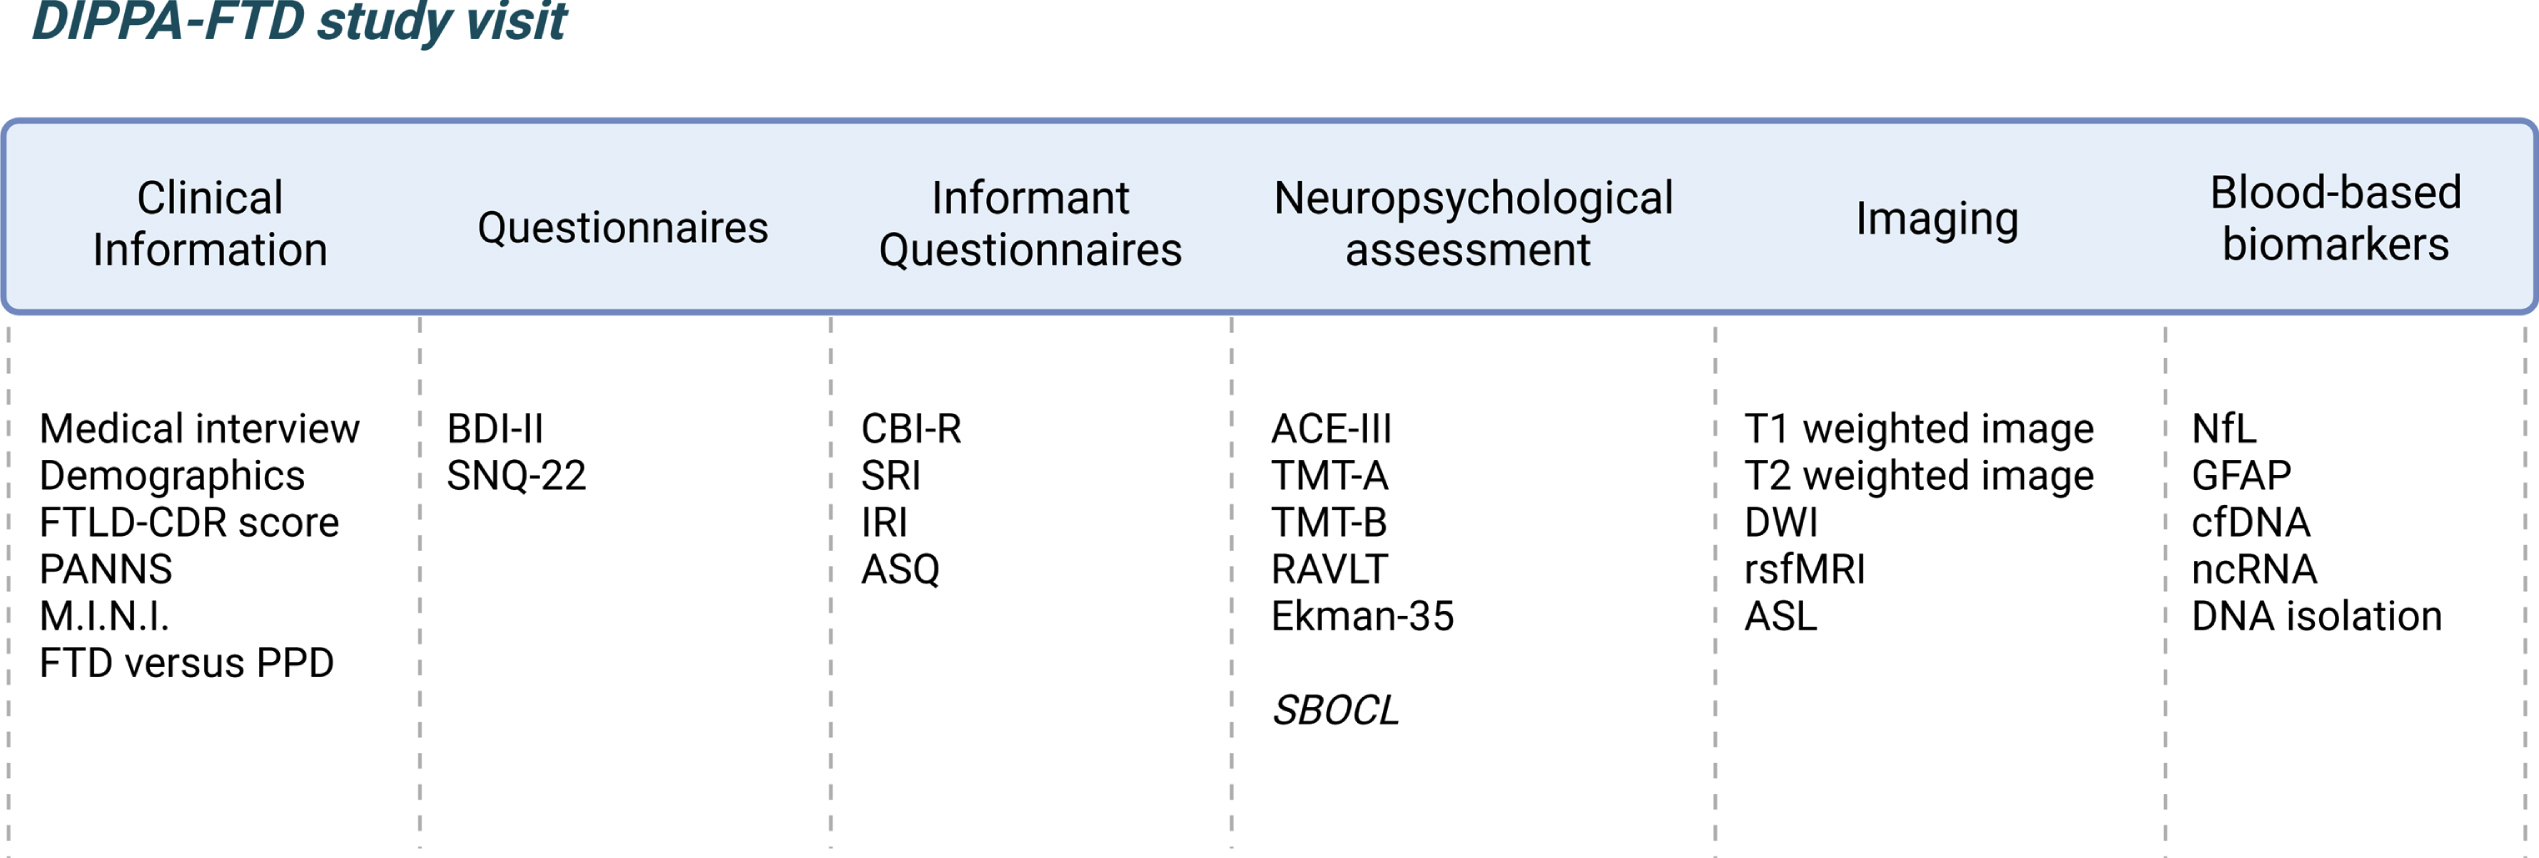 Overview study protocol of prospective DIPPA-FTD study (created with BioRender.com). FTLD-CDR score, frontotemporal Lobar degeneration Clinical Dementia Rating scale; PANNS, Positive And Negative Syndrome Scale; M.I.N.I., Mini-International Neuropsychiatric Interview; BDI-II, Beck Depression Inventory®-II; SNQ-22, Social Norm Questionnaire-22; CBI-R, Cambridge Behavioral Inventory Revised; SRI, Stereotypy Rating Inventory; IRI, Interpersonal Reactivity Index; ASQ, Autonomic Symptoms Questionnaire; ACE-III, Addenbrooke’s Cognitive Examination III; TMT-A, Trail Making Test part A; TMT-B, Trail Making Test part B; RAVLT, Rey Auditory Verbal Learning Test; SBOCL, Social Behavior Observer Checklist; DWI, Diffusion Weighted Imaging; rsfMRI, resting state functional MRI; ASL, arterial spin labelling; NfL, neurofilament light; GFAP, glial fibrillary acidic protein; cfDNA, cell free DNA; ncRNA, non-coding RNA.